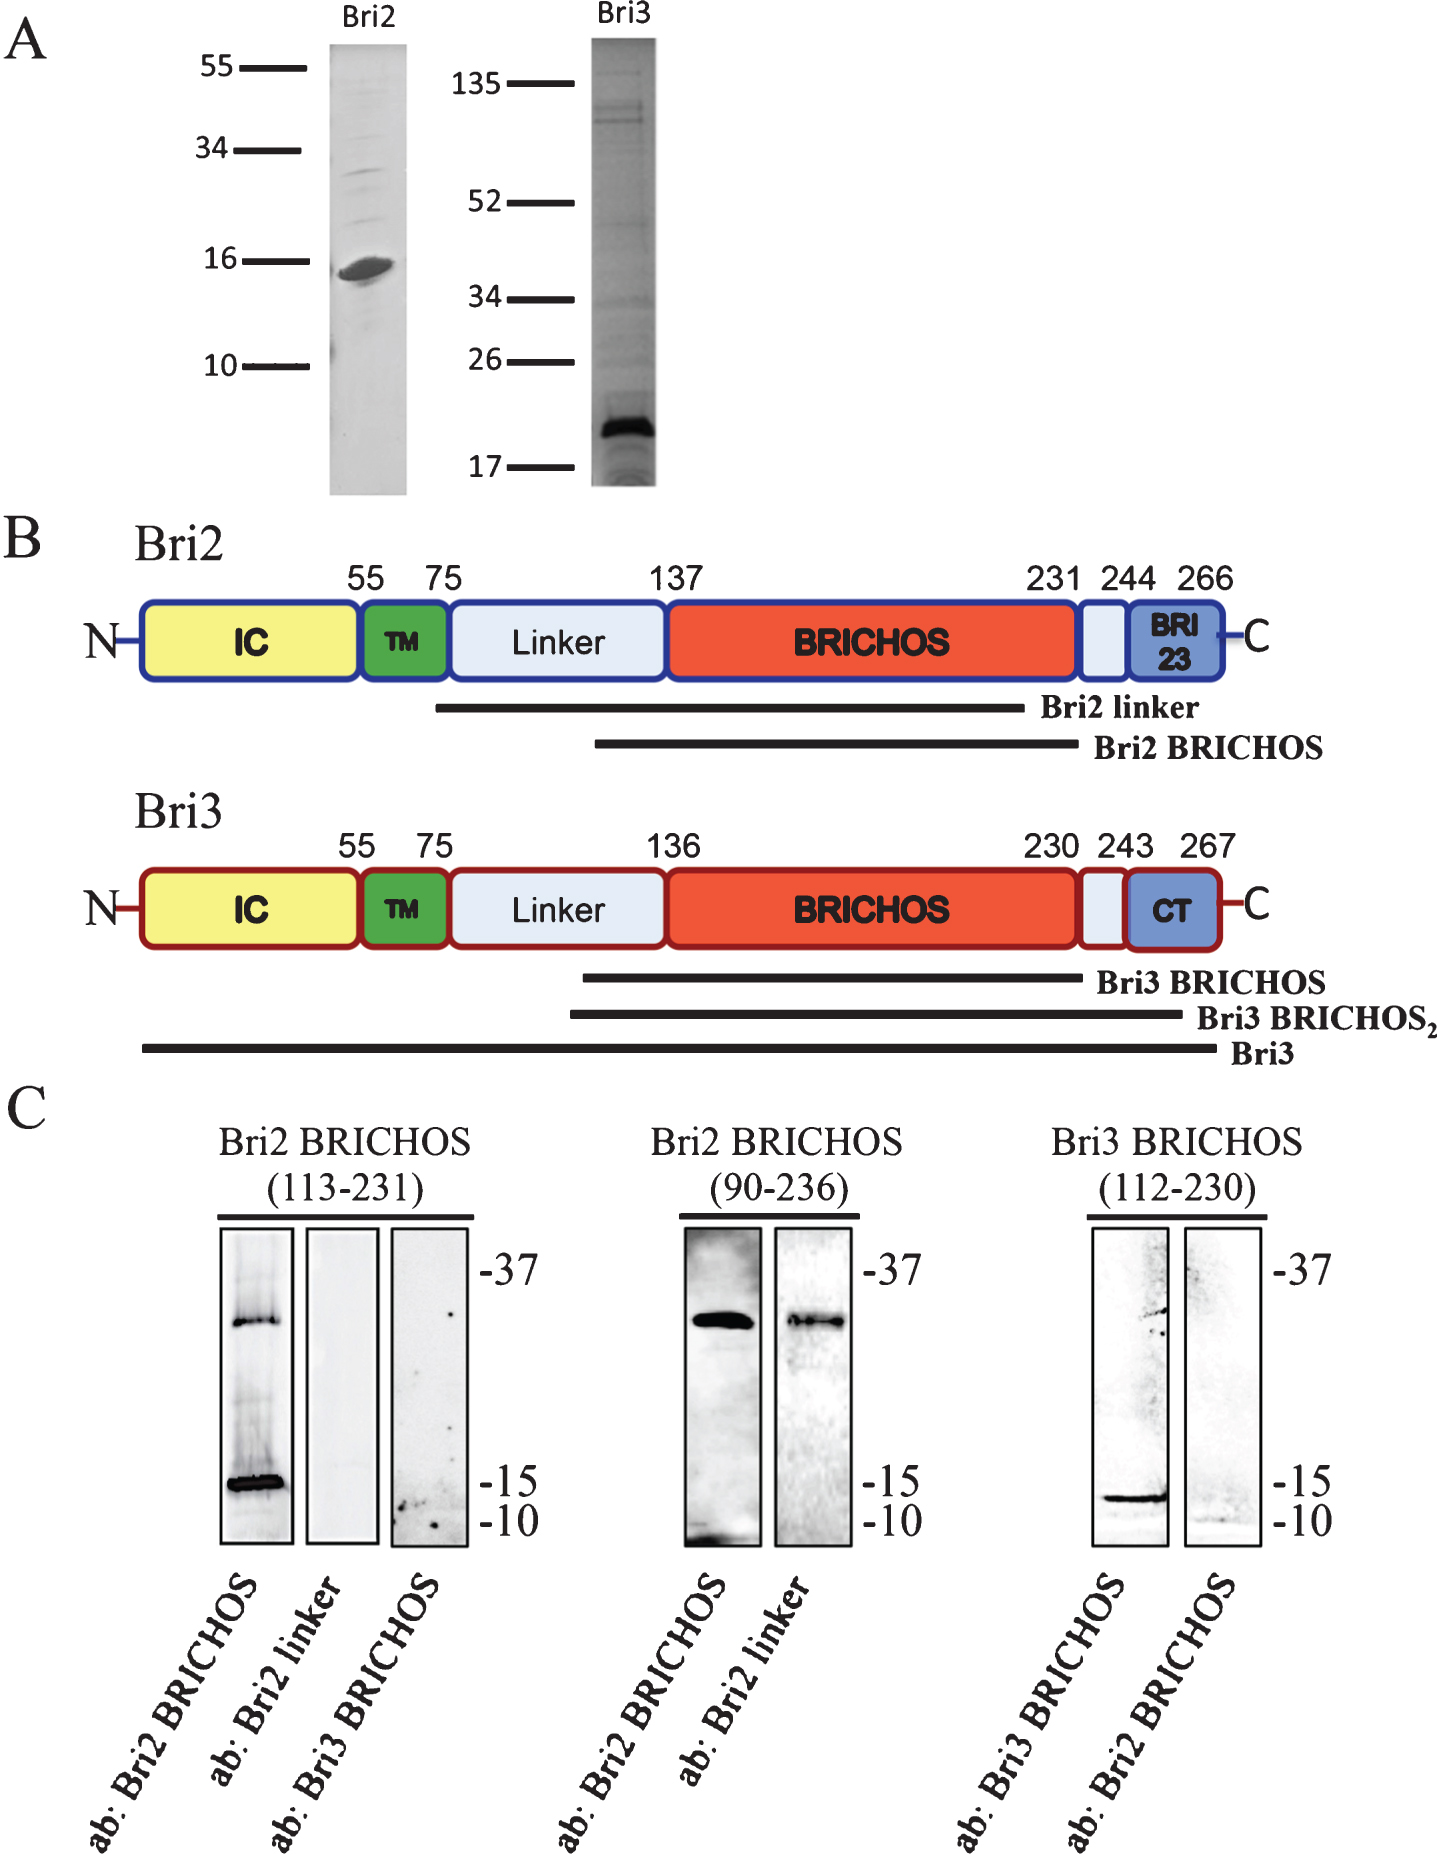 Bri2 and Bri3 architecture and antibody reactivity. A) SDS-PAGE and Coomassie staining of recombinant Bri2 BRICHOS (residues 113–231) (left) and Bri3 BRICHOS (residues 112–230) (right) domains. The lines to the left show migration of size markers with masses in kDa. B) Bri2 and Bri3 are characterized by a similar architecture: an intracellular domain (IC) (yellow), a transmembrane (TM) region (green), a linker region (light blue), the BRICHOS domain (red) and a C-terminal segment (Bri23 or CT, blue). The sequence positions of the different domains in Bri2 and Bri3, respectively, are indicated. Antibodies, used in this study, were raised against the indicated segments of Bri2 and Bri3. C) Western blots of recombinant Bri2 and Bri3 BRICHOS proteins (corresponding to residues 113–231 of Bri2, residues 90–236 of Bri2 and residues 112–230 of Bri3) using the anti-Bri2 linker; the anti-Bri2 BRICHOS; and the anti-Bri3 BRICHOS antibodies. The upper band for Bri2 BRICHOS (113-231) corresponds to a dimer. Size markers (kDa) are shown to the right of the blots.